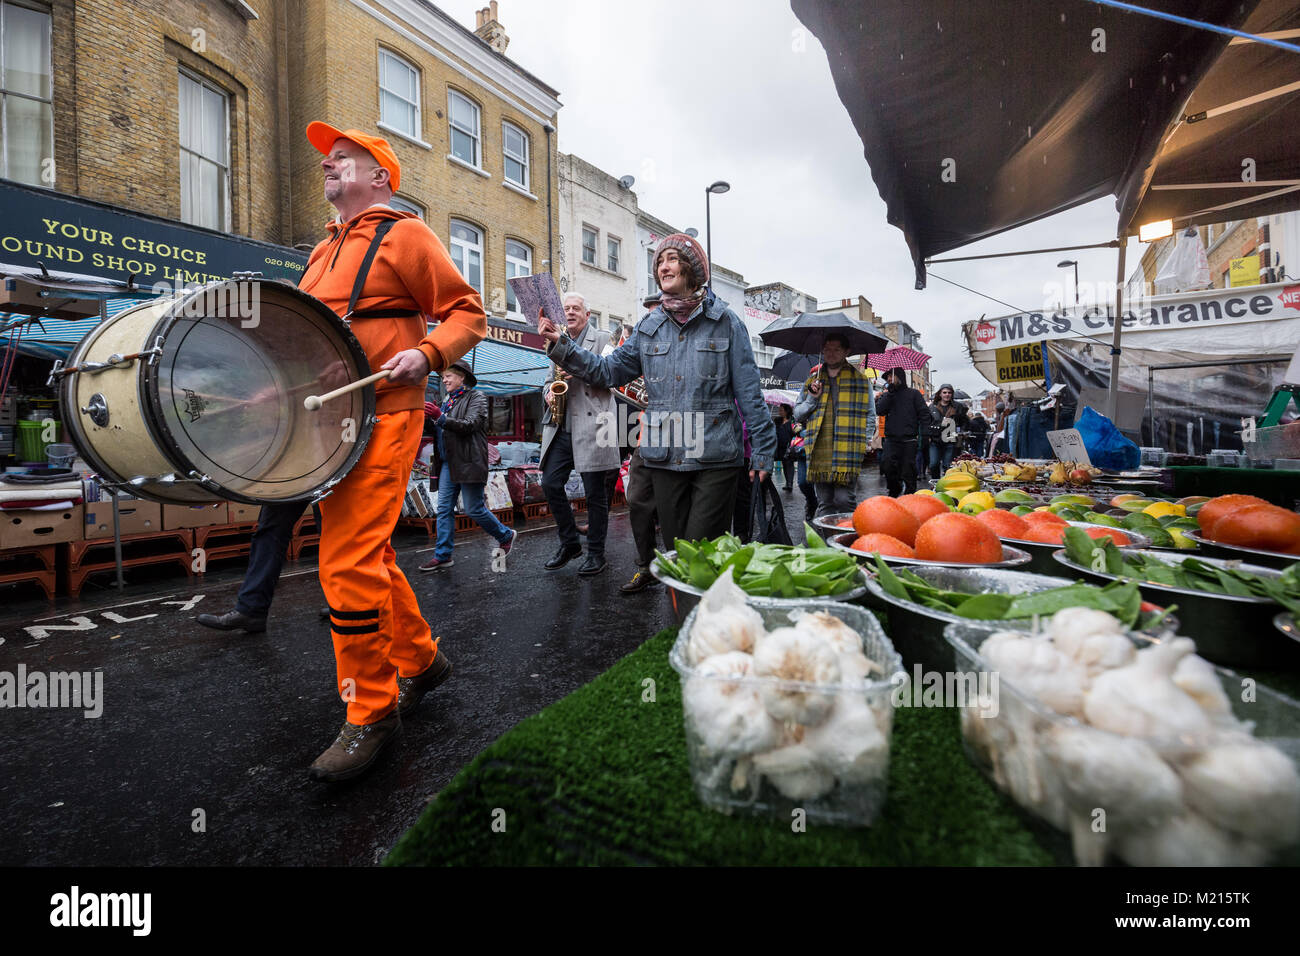 London, UK. 3rd Feb, 2018. Local residents celebrate the return of the iconic Deptford Anchor with a celebratory musical procession as the anchor is finally returned to its original place at the south end of Deptford High Street after being removed in 2013 . Credit: Guy Corbishley/Alamy Live News Stock Photo